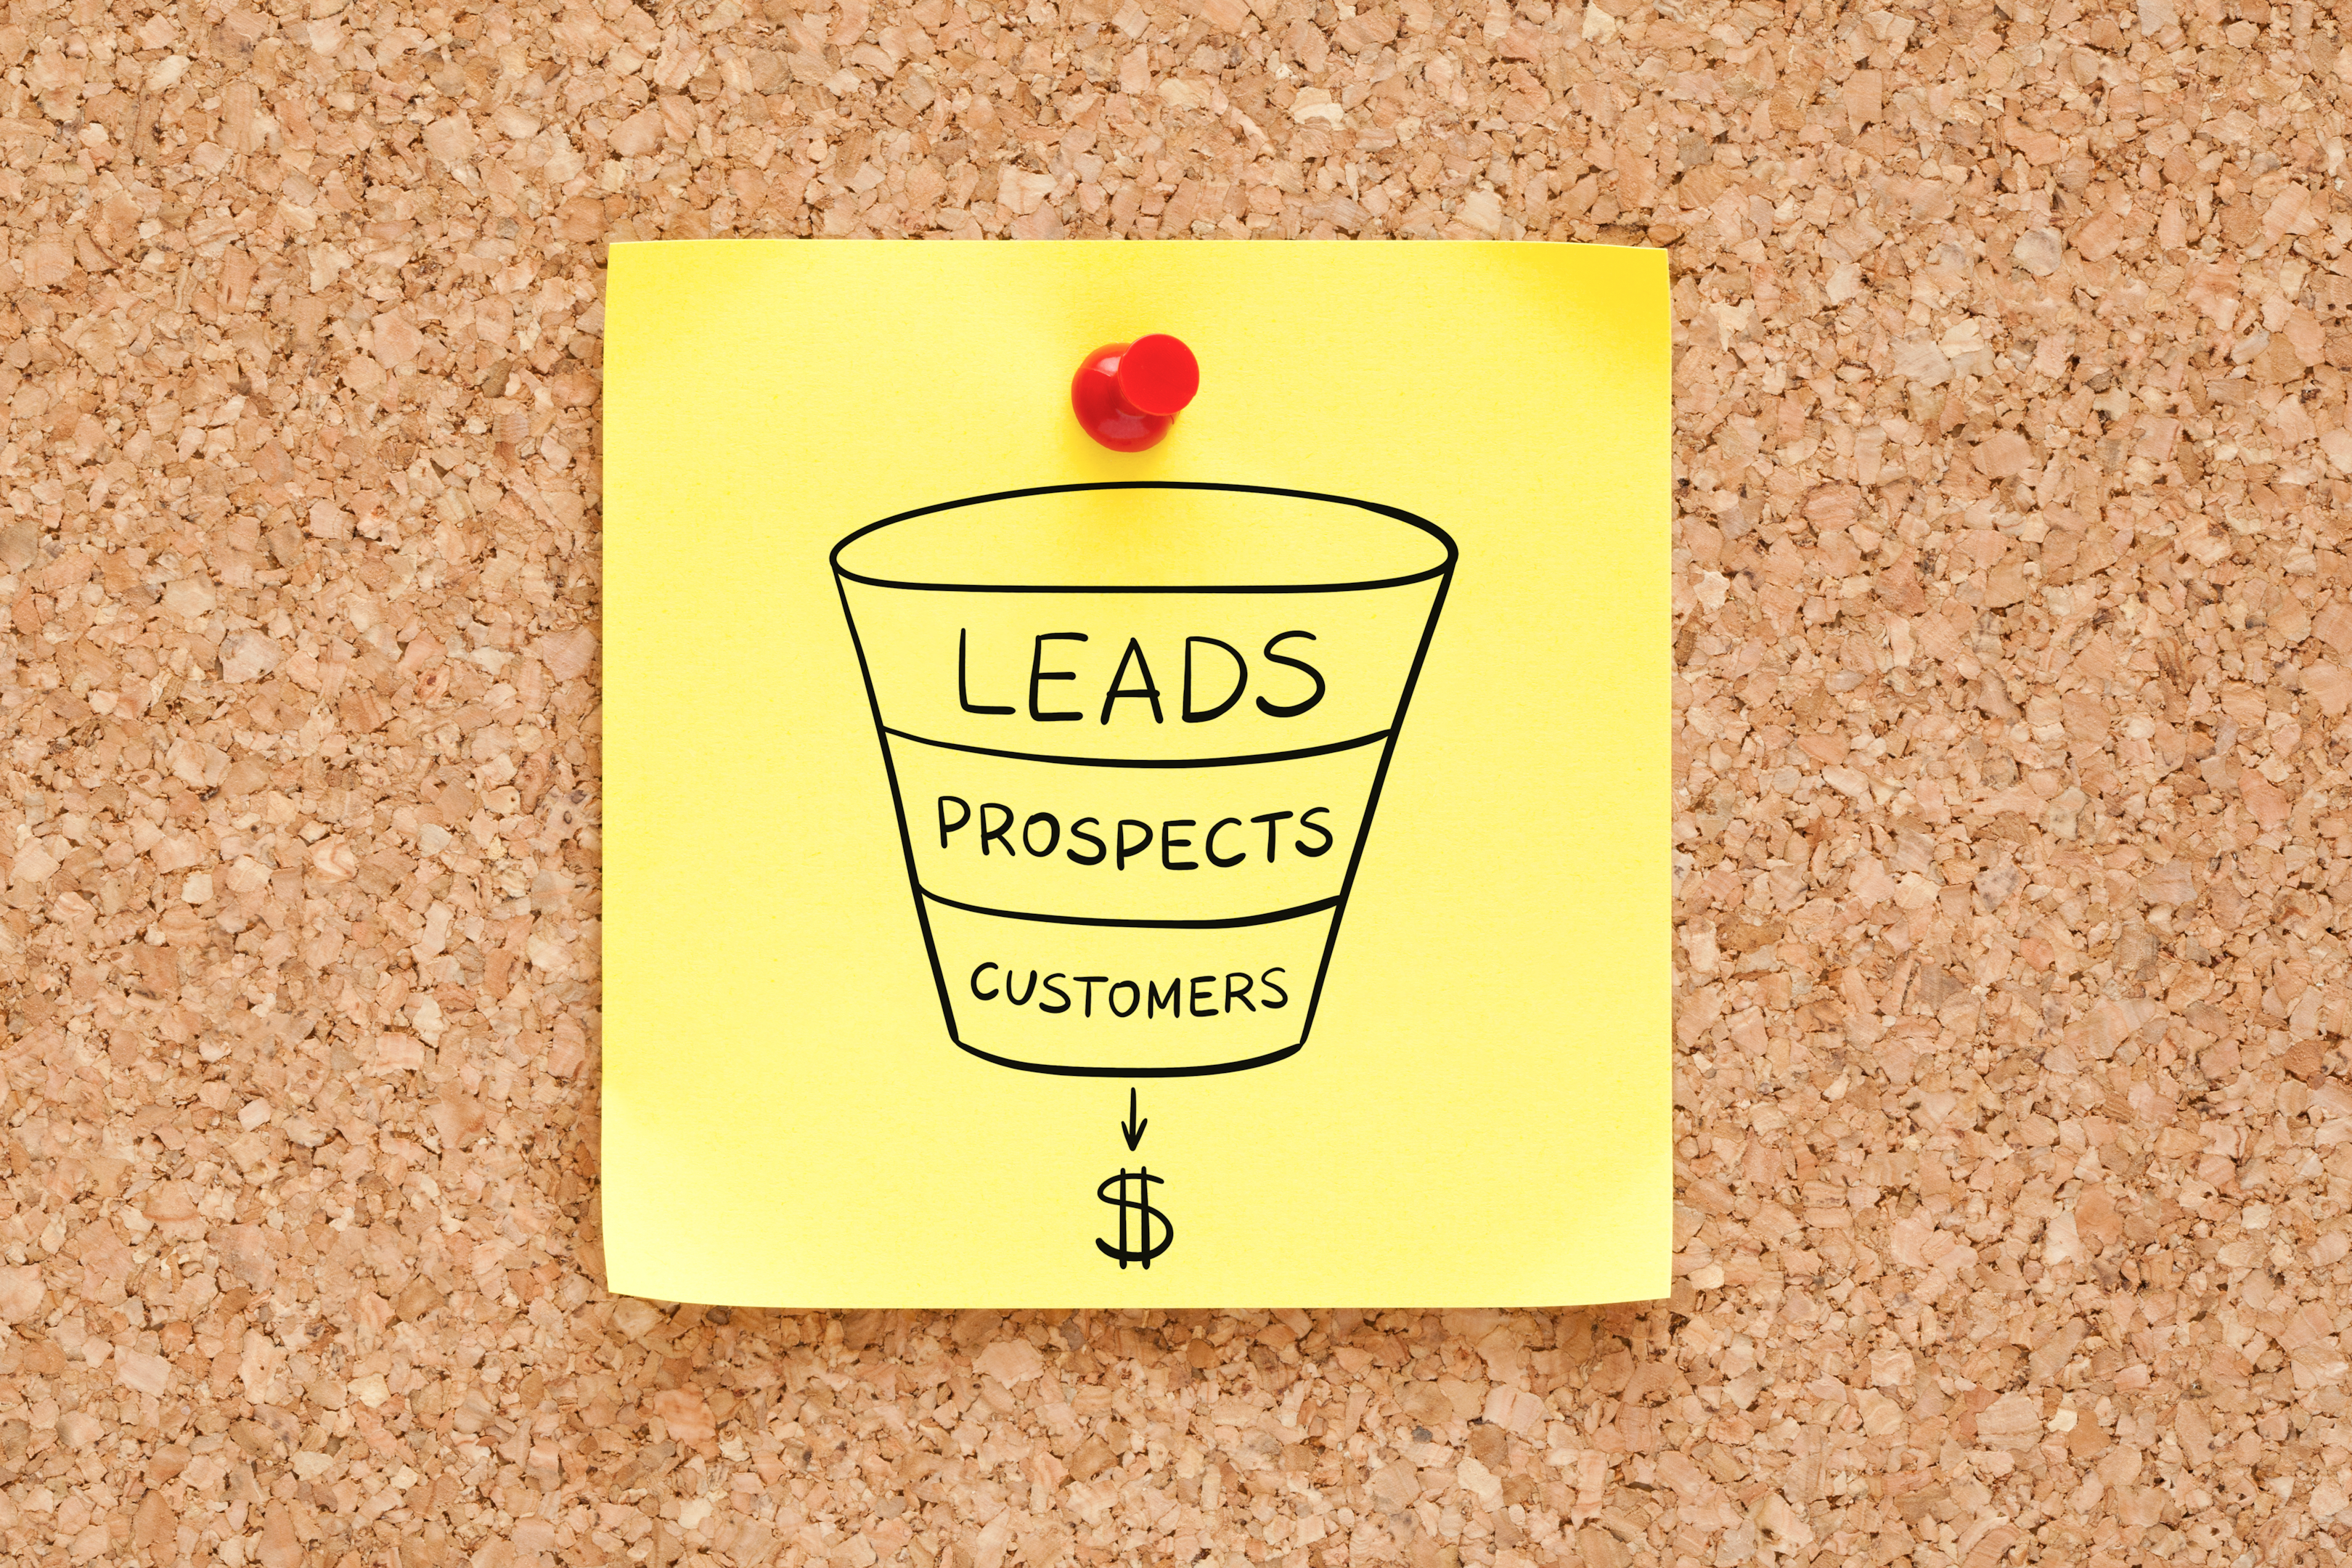 How can I build a sales-generating marketing funnel?